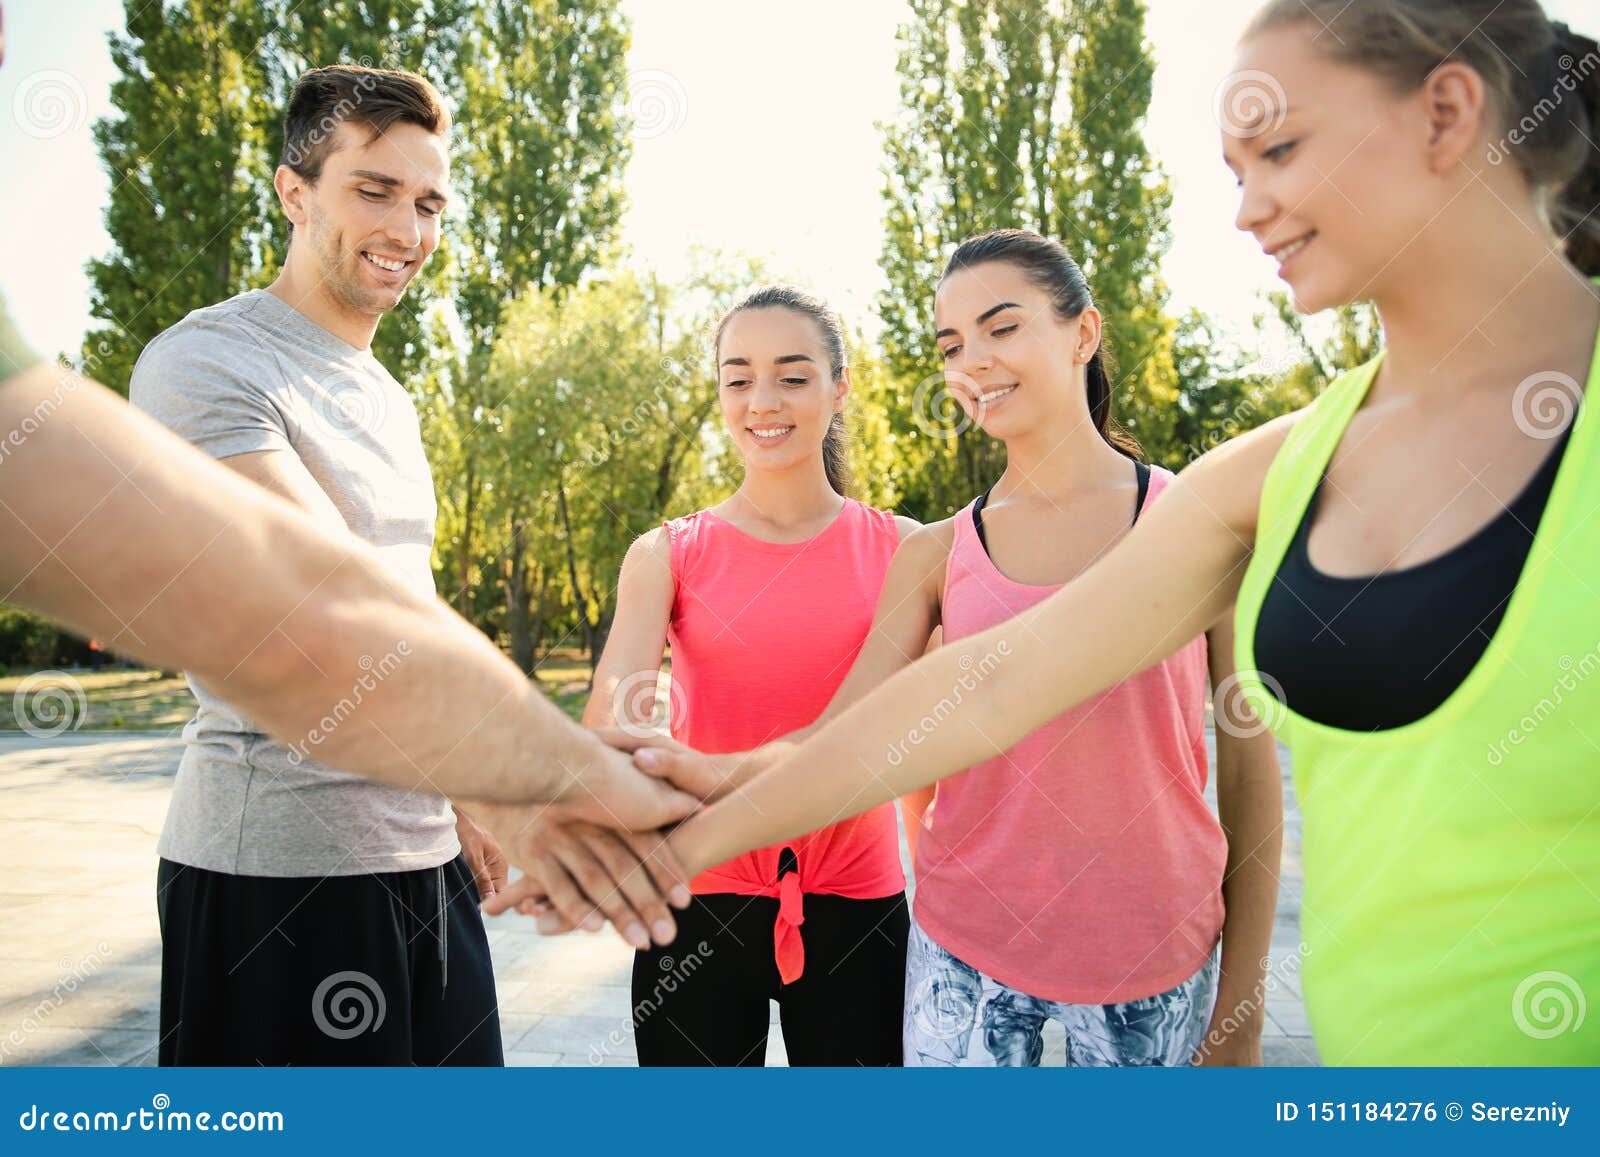 Group of Sporty People Putting Hands Together Outdoors Stock Photo ...